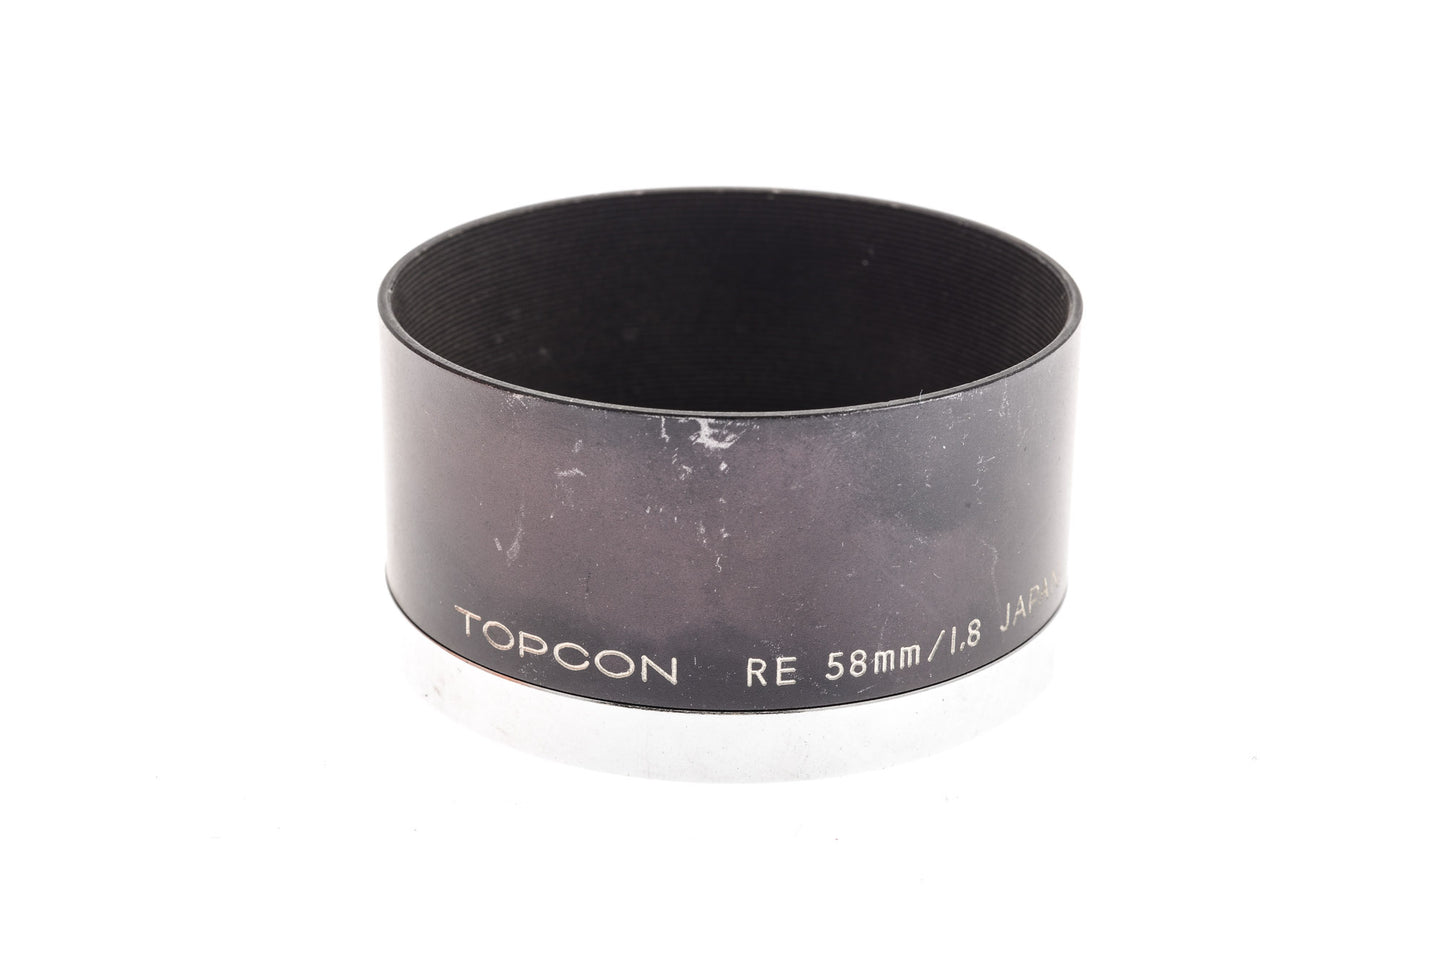 Topcon Metal Lens Hood for 58mm f1.8 RE - Accessory